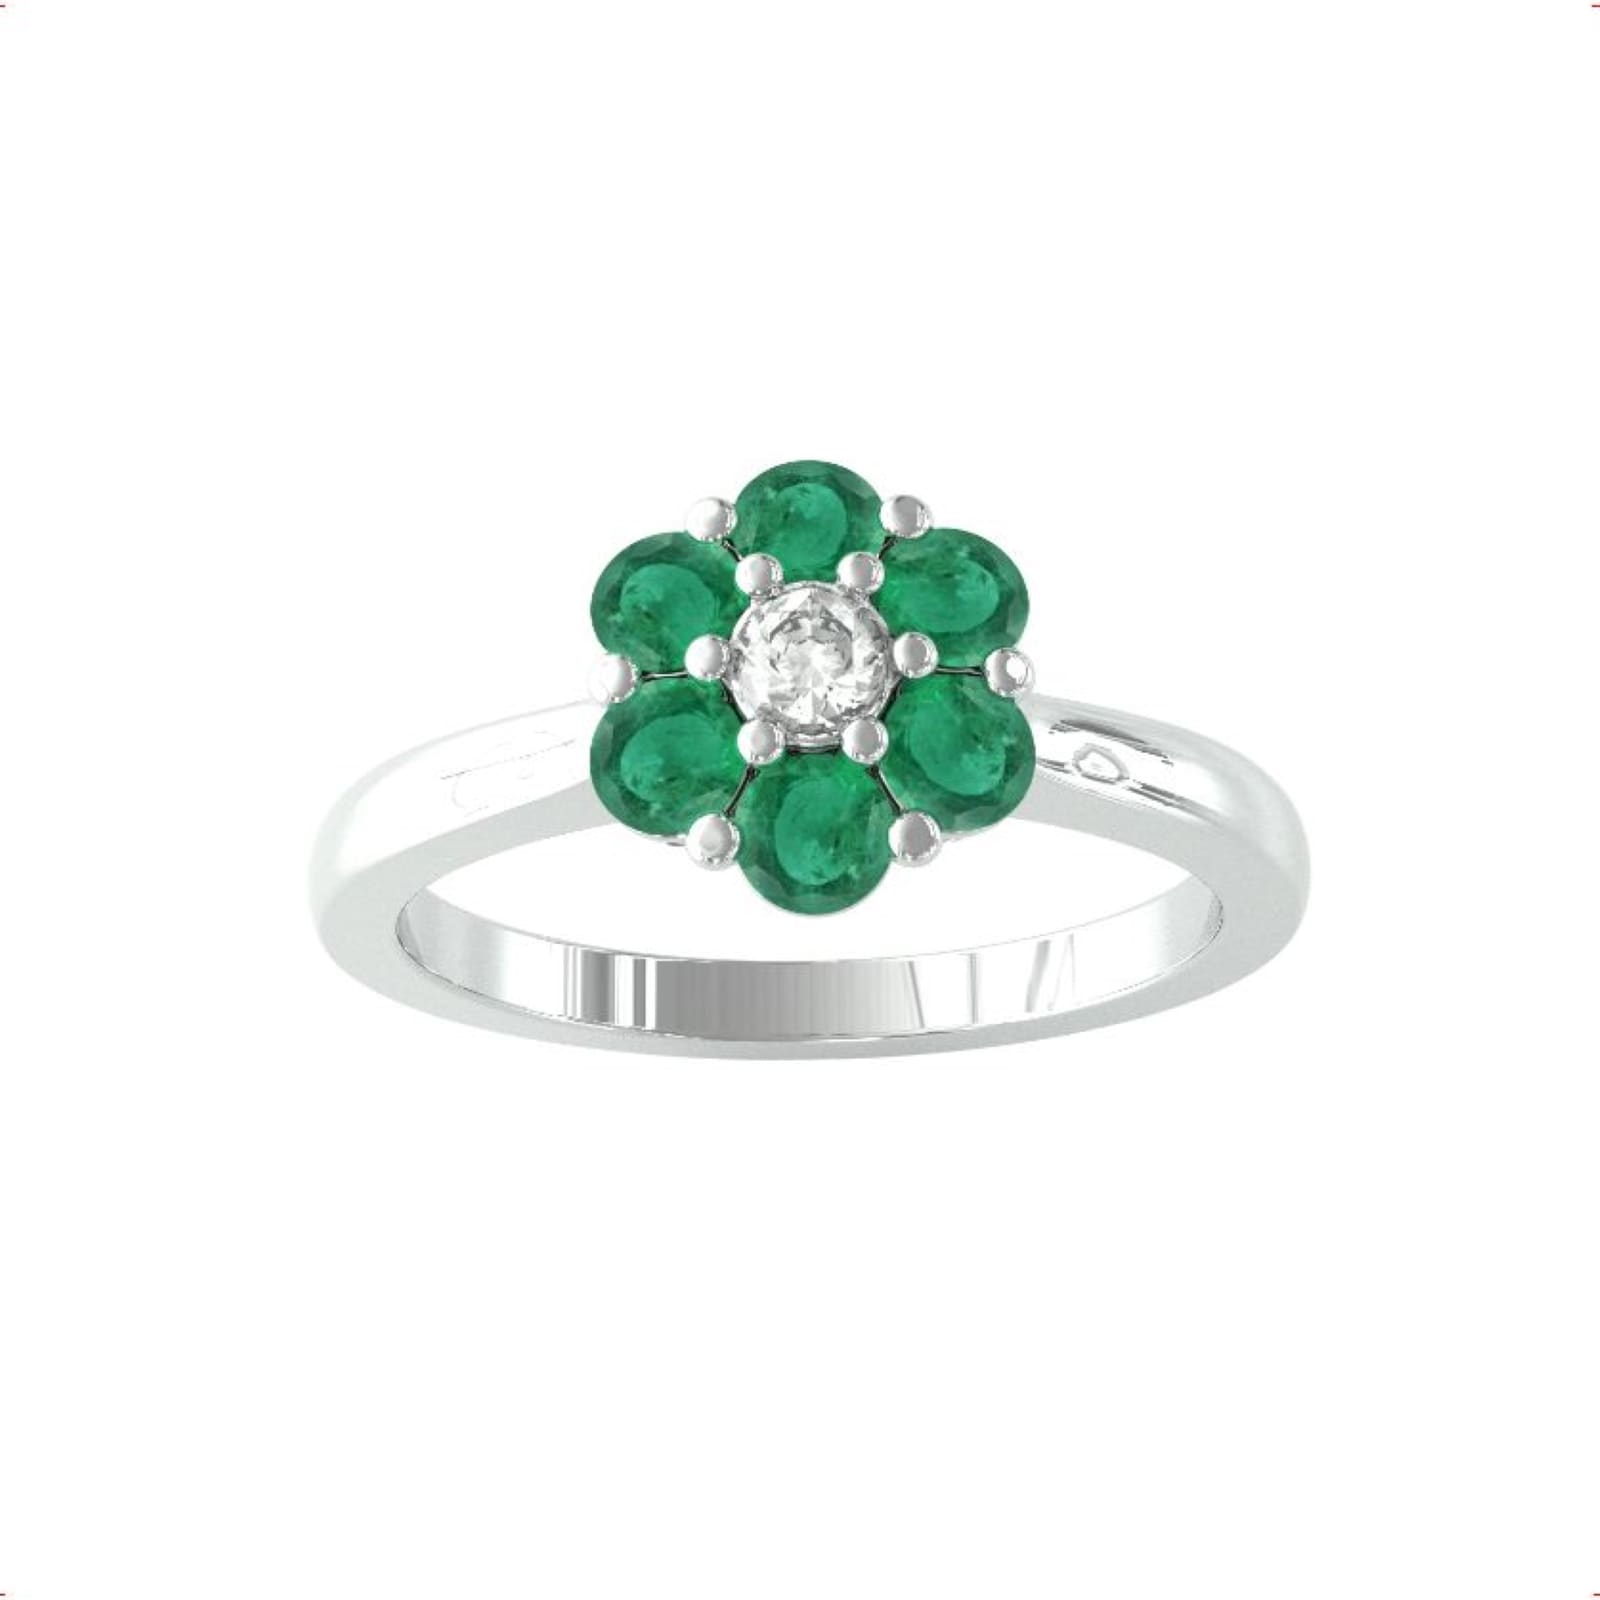 9ct White Gold Emerald & Diamond Cluster Ring - Ring Size G.5